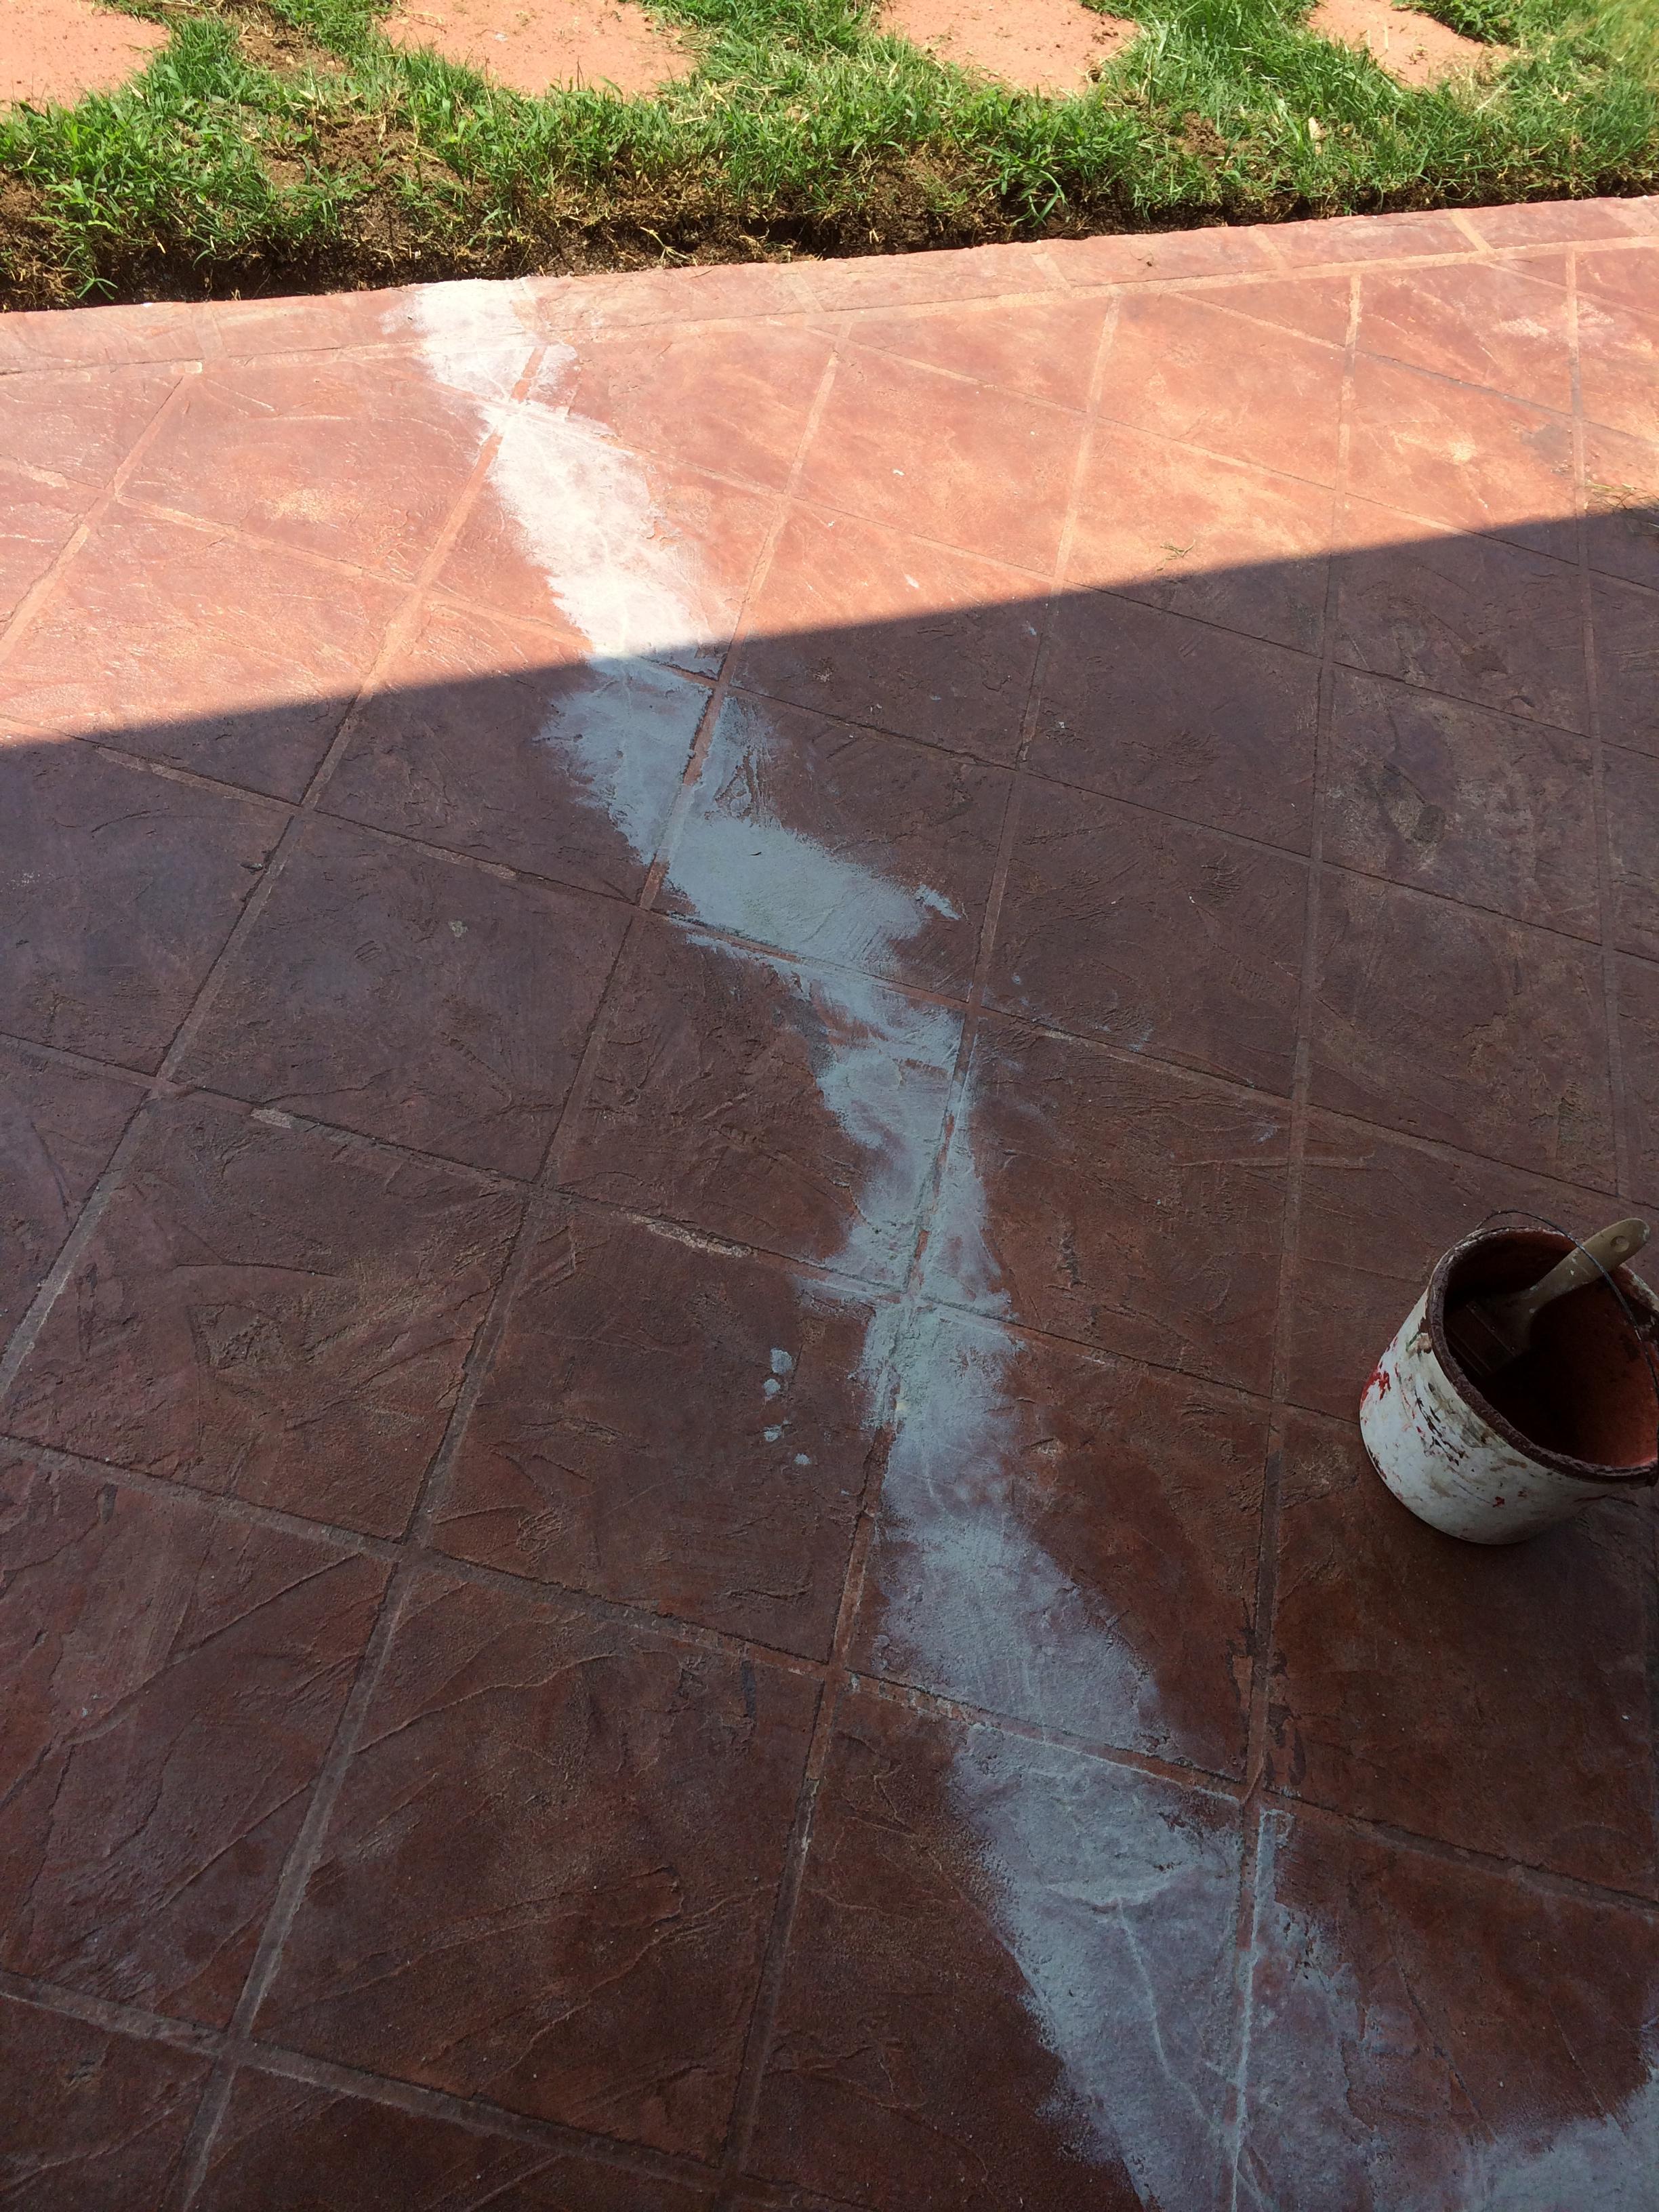 Fixed cracks in the patio before painting